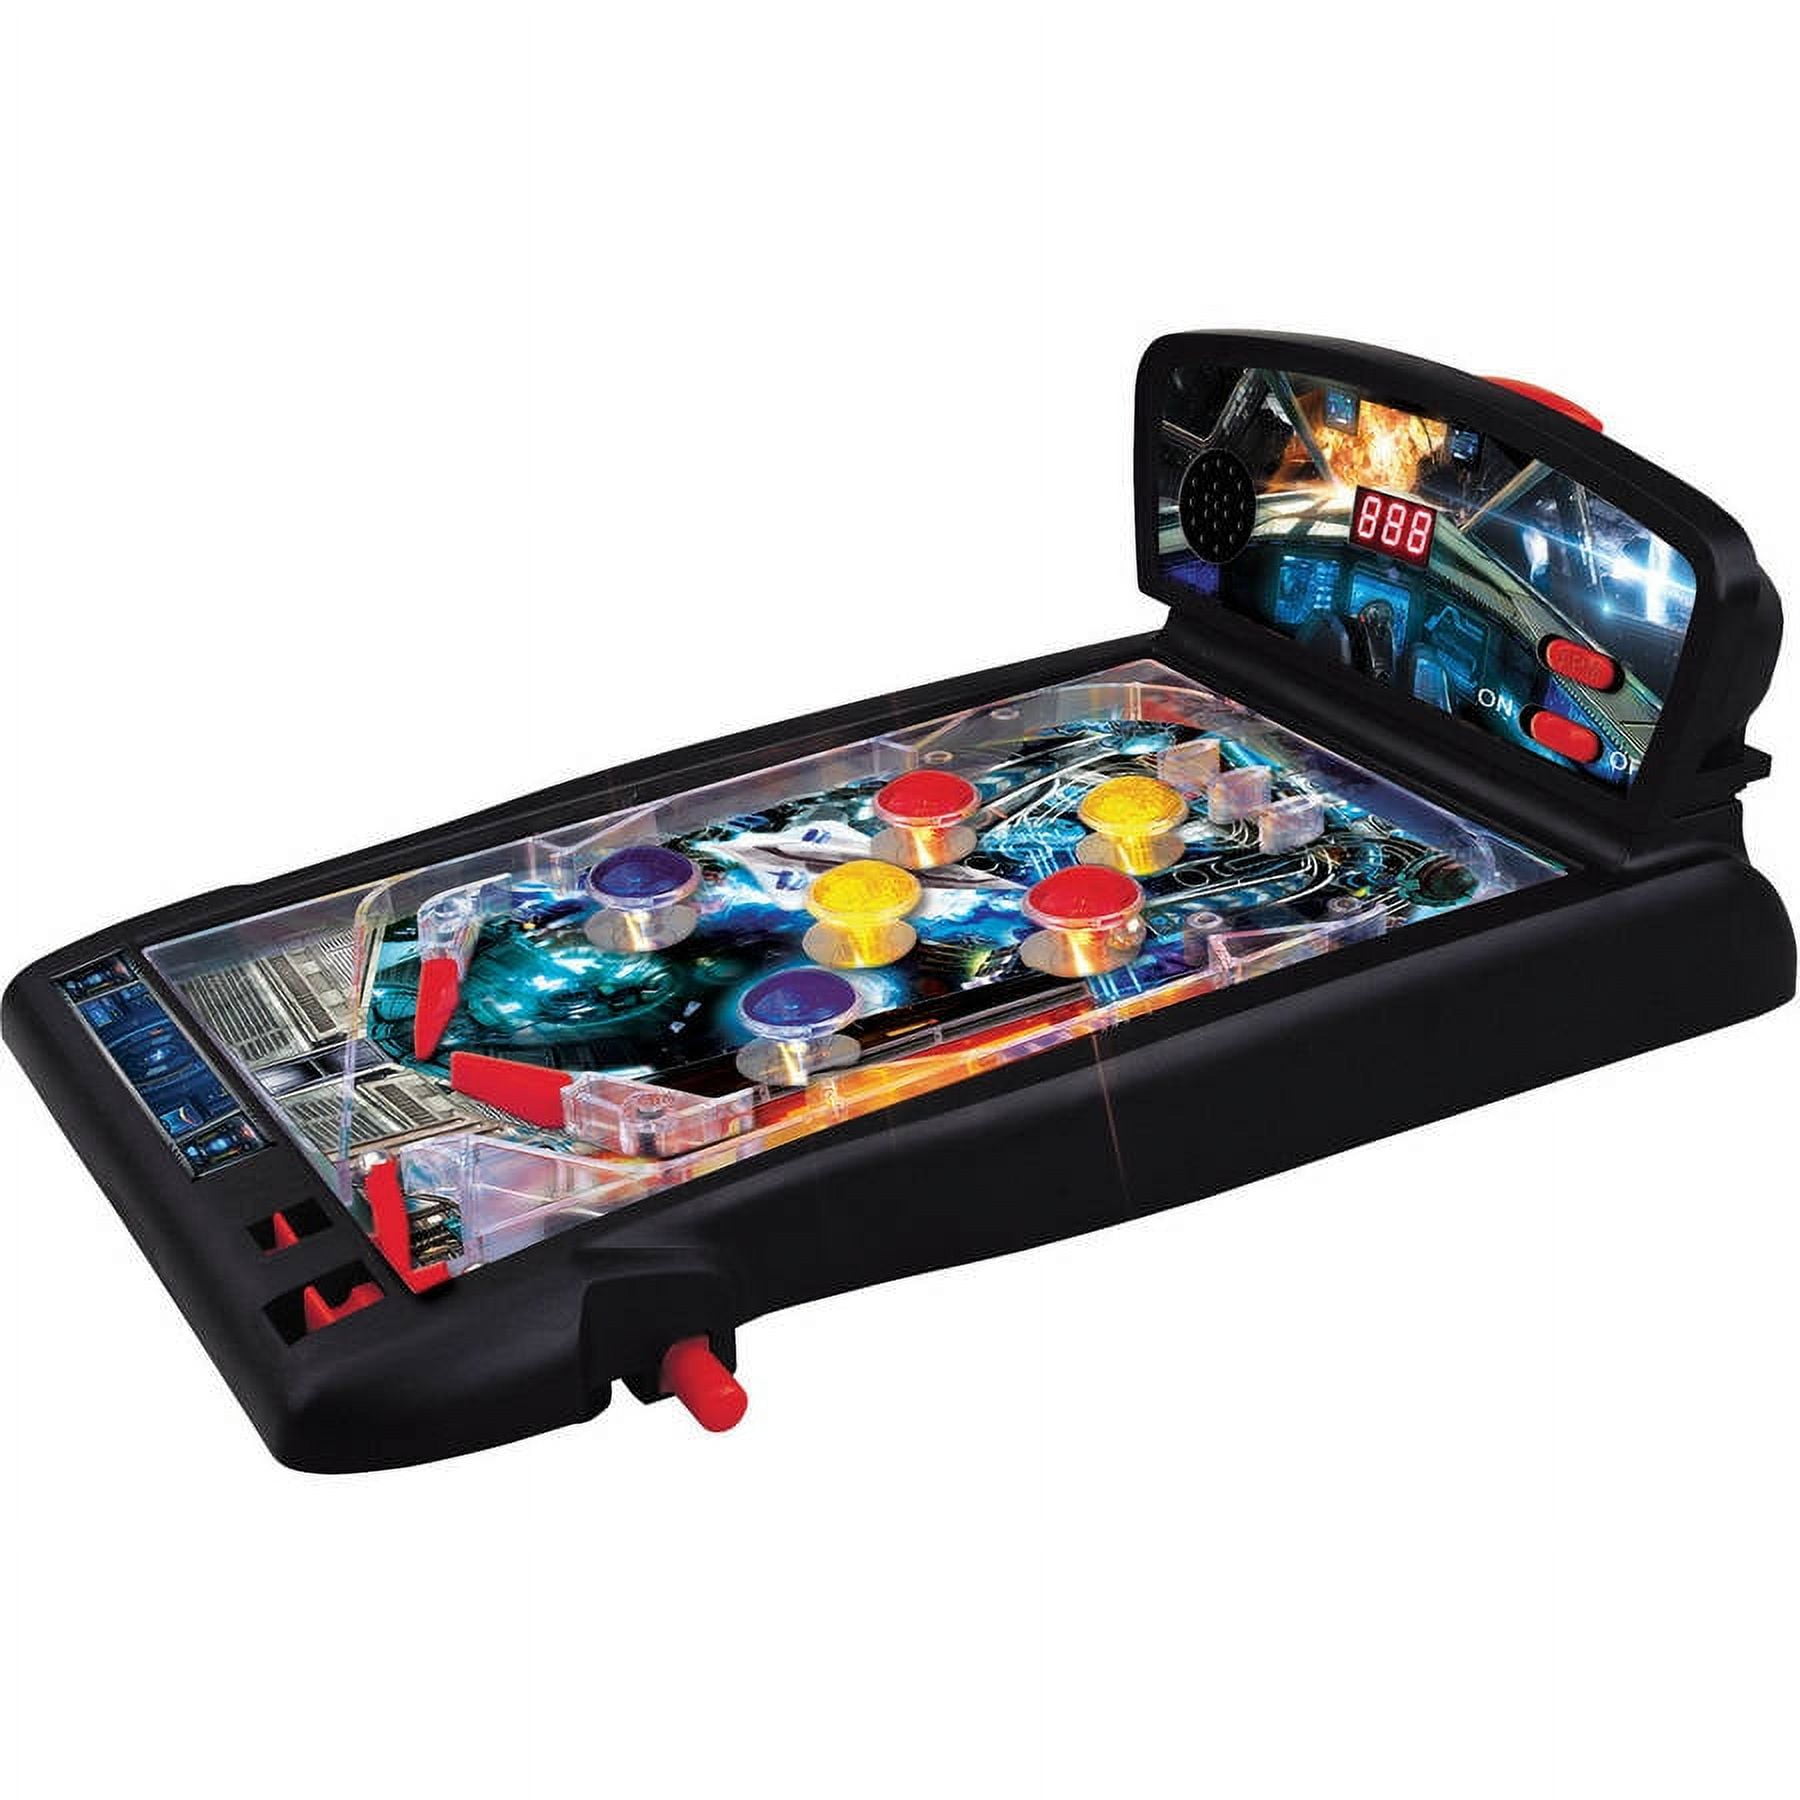 GB Pacific New Era Pinball Game - Unisex Item for Girl or Boy Ages 3 Years  and up 